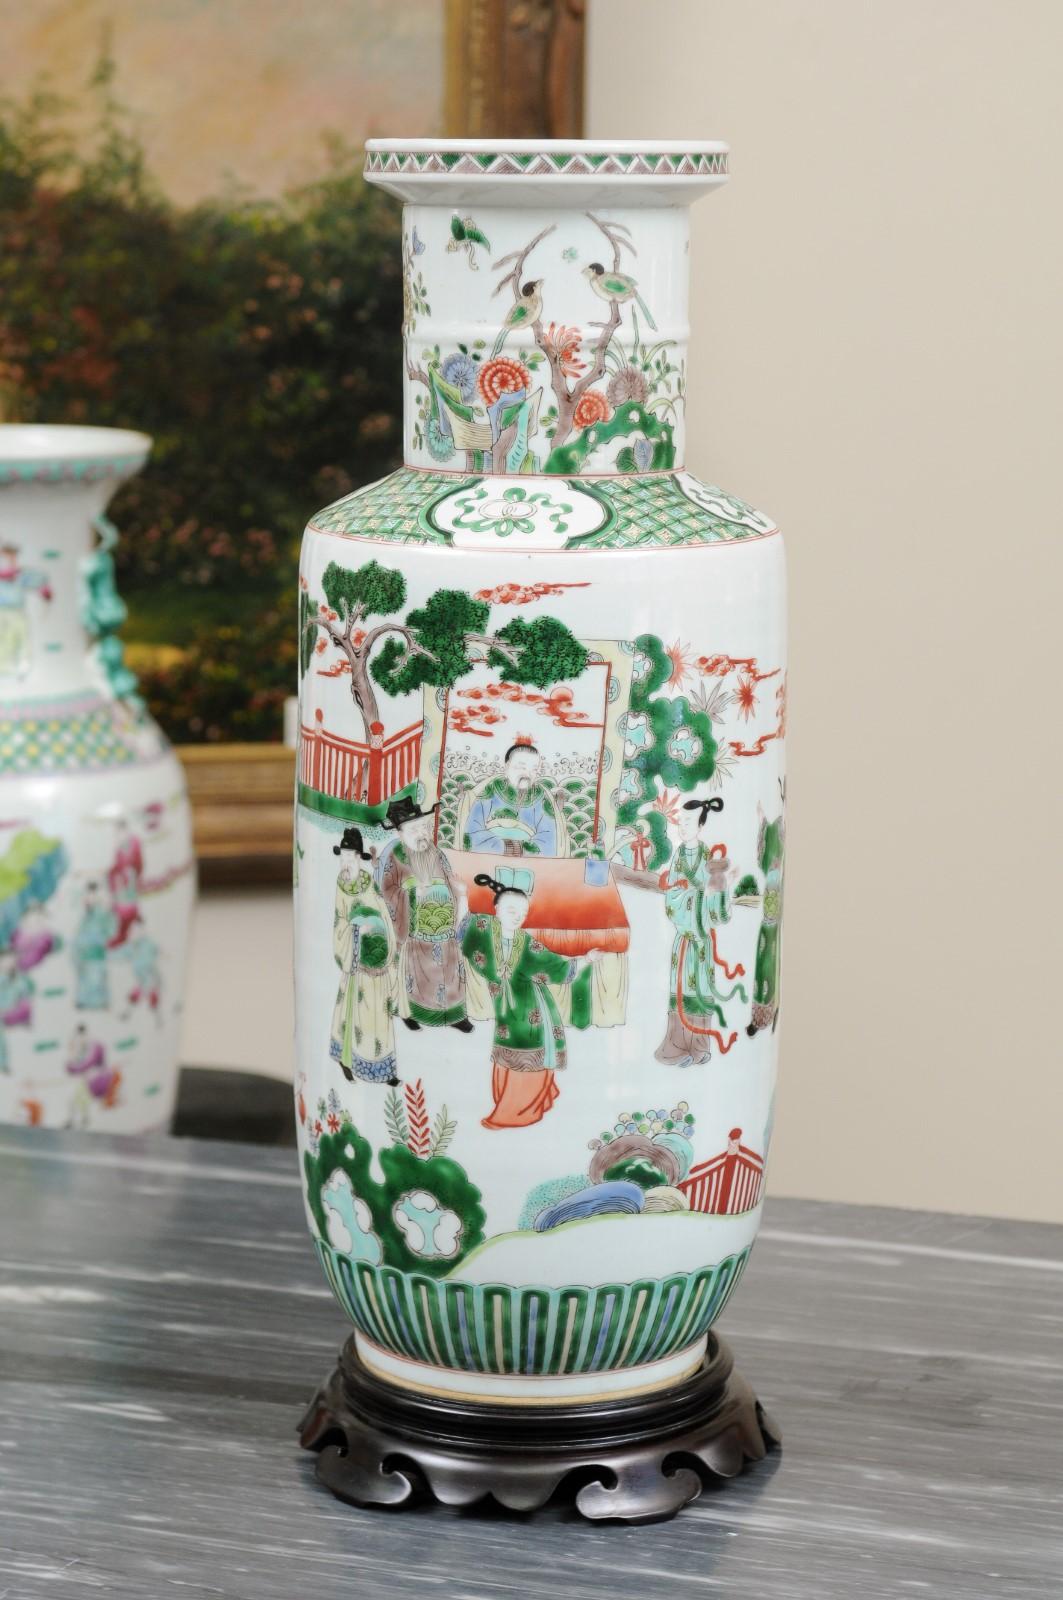 A beautiful vase decorated with scholars and government official in varied activities. Based on the design and quality of decorations, it is believed to have been made in the mid - Republic period of China (1912-1949)
This vase was purchased in